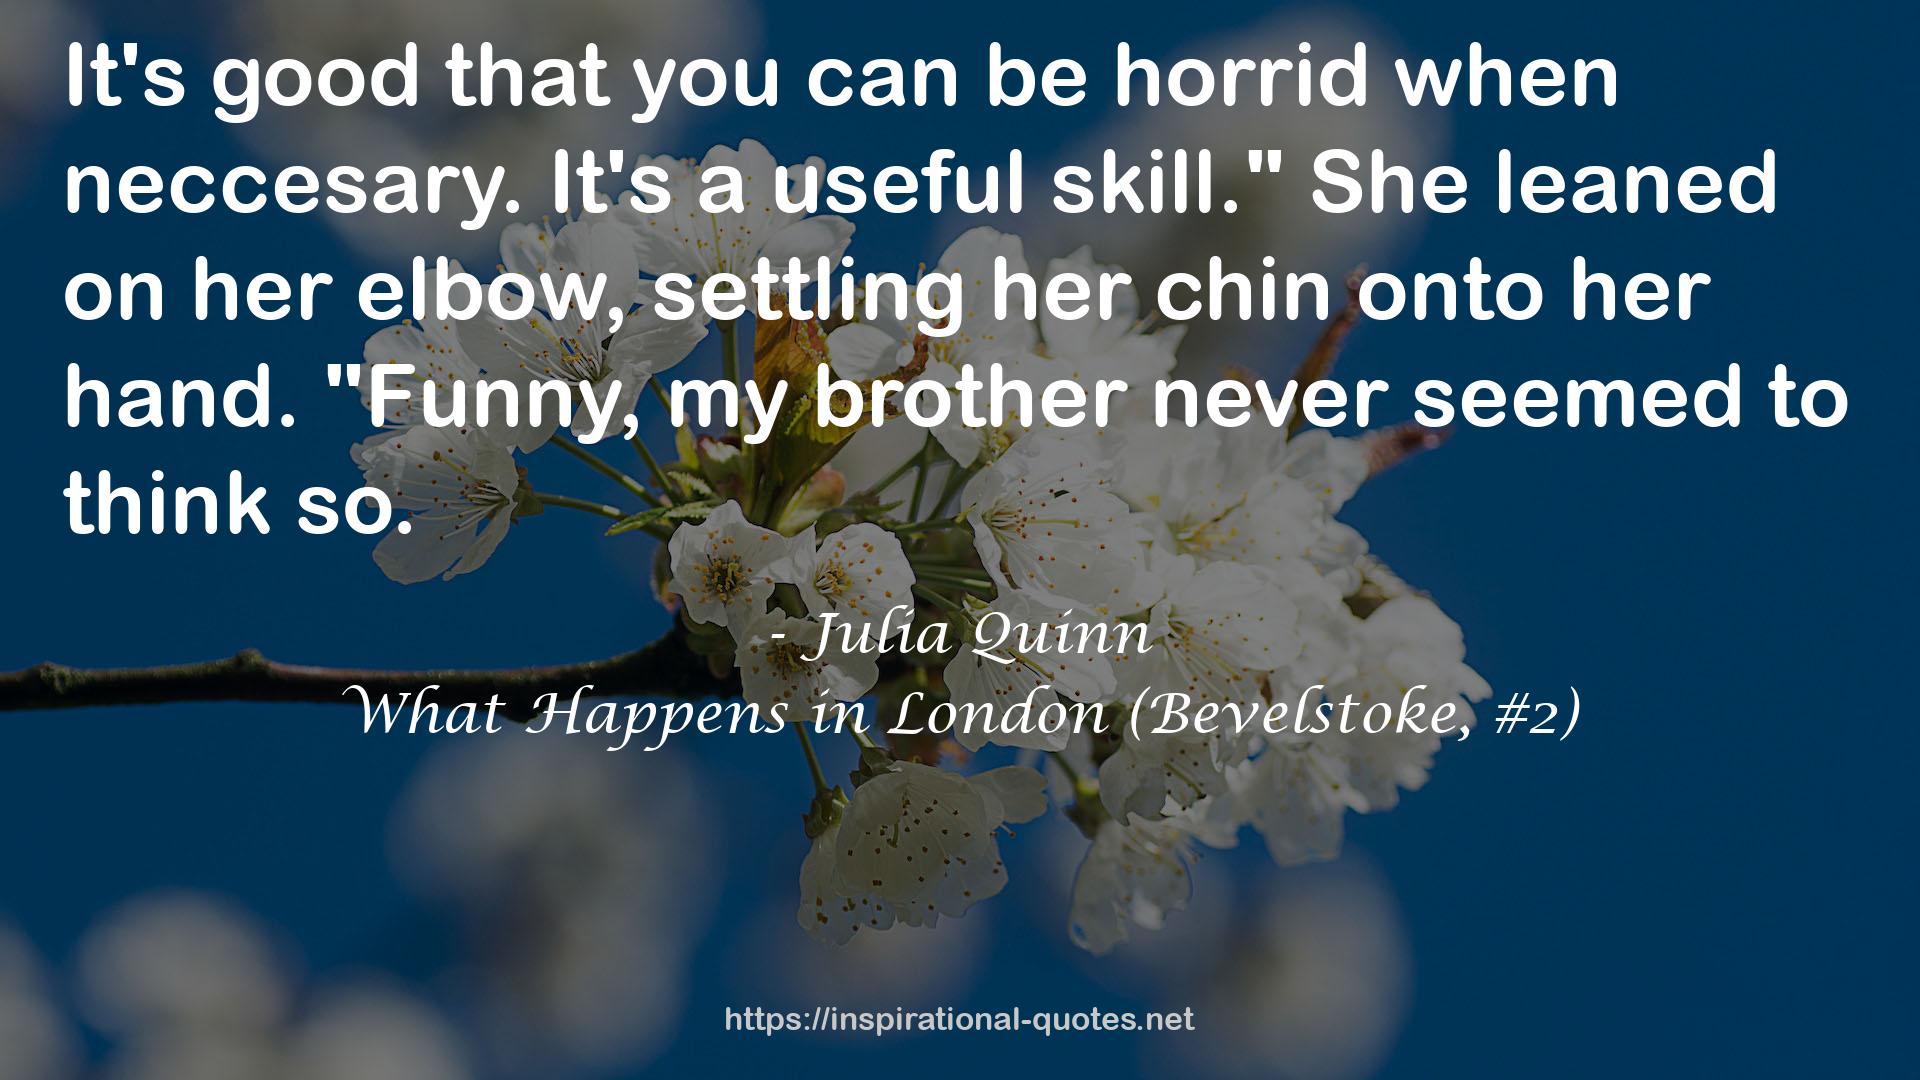 What Happens in London (Bevelstoke, #2) QUOTES